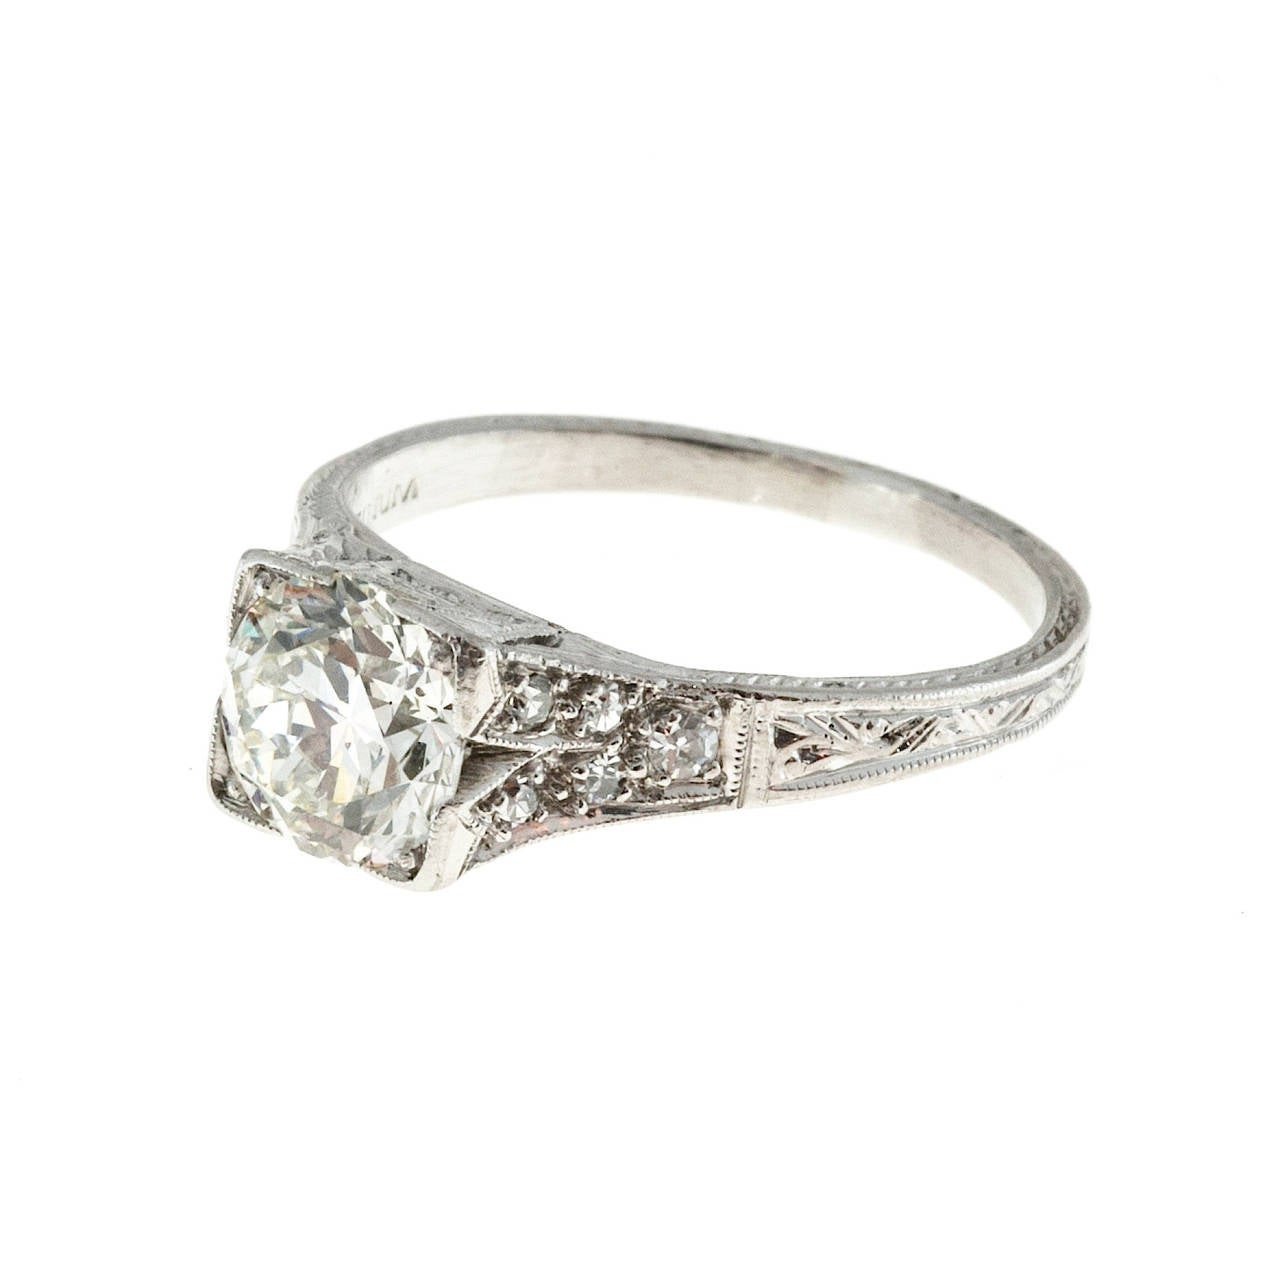 Diamond Rings For Sale
 1930s Diamond Platinum Engagement Ring For Sale at 1stdibs